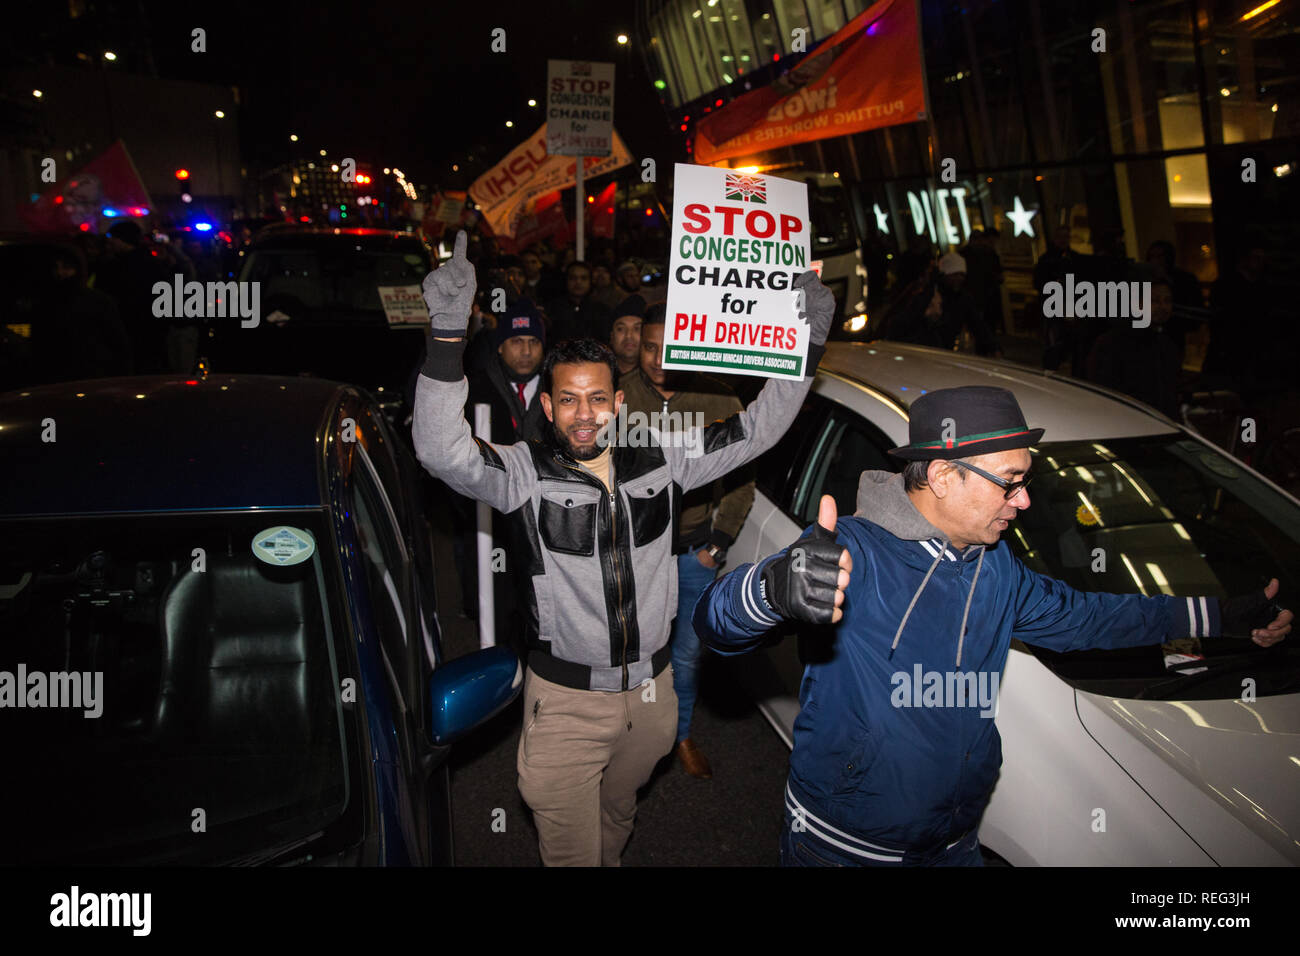 London, UK. 21st January, 2019. Hundreds of minicab drivers take part in a protest outside the offices of Transport for London organised by the Independent Workers Union of Great Britain's (IWGB) United Private Hire Drivers branch following the introduction last month of congestion charges for minicabs. Credit: Mark Kerrison/Alamy Live News Stock Photo